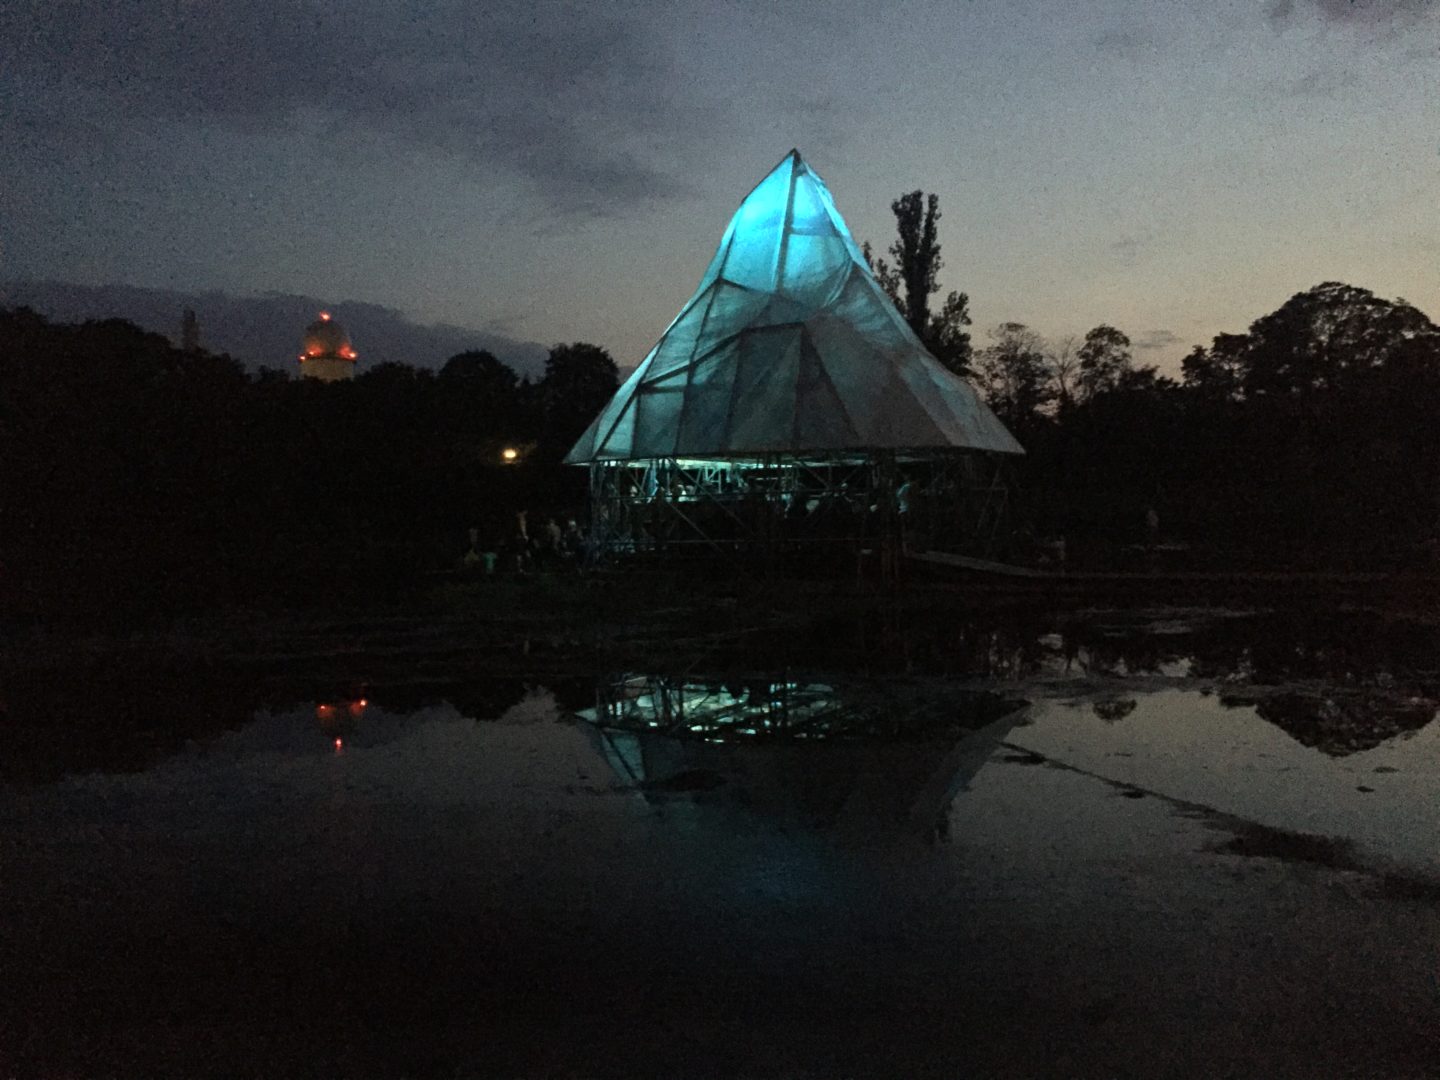 The Floating University pictured at night. The depicted structure is illuminated light blue and resembles an iceberg. It is surrounded by darkness. Water in the foreground reflects the light.